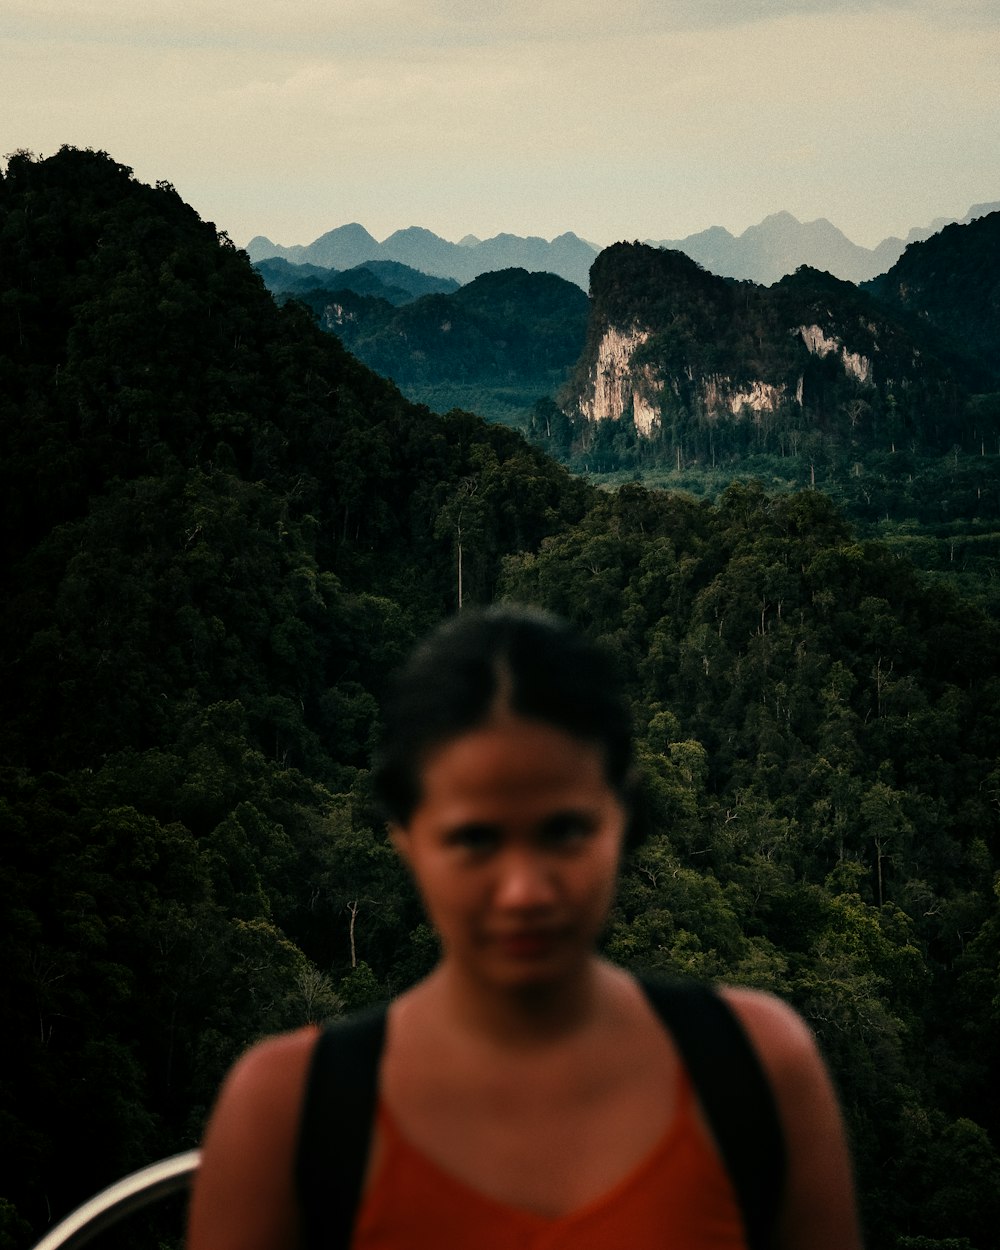 a woman standing in front of a mountain range